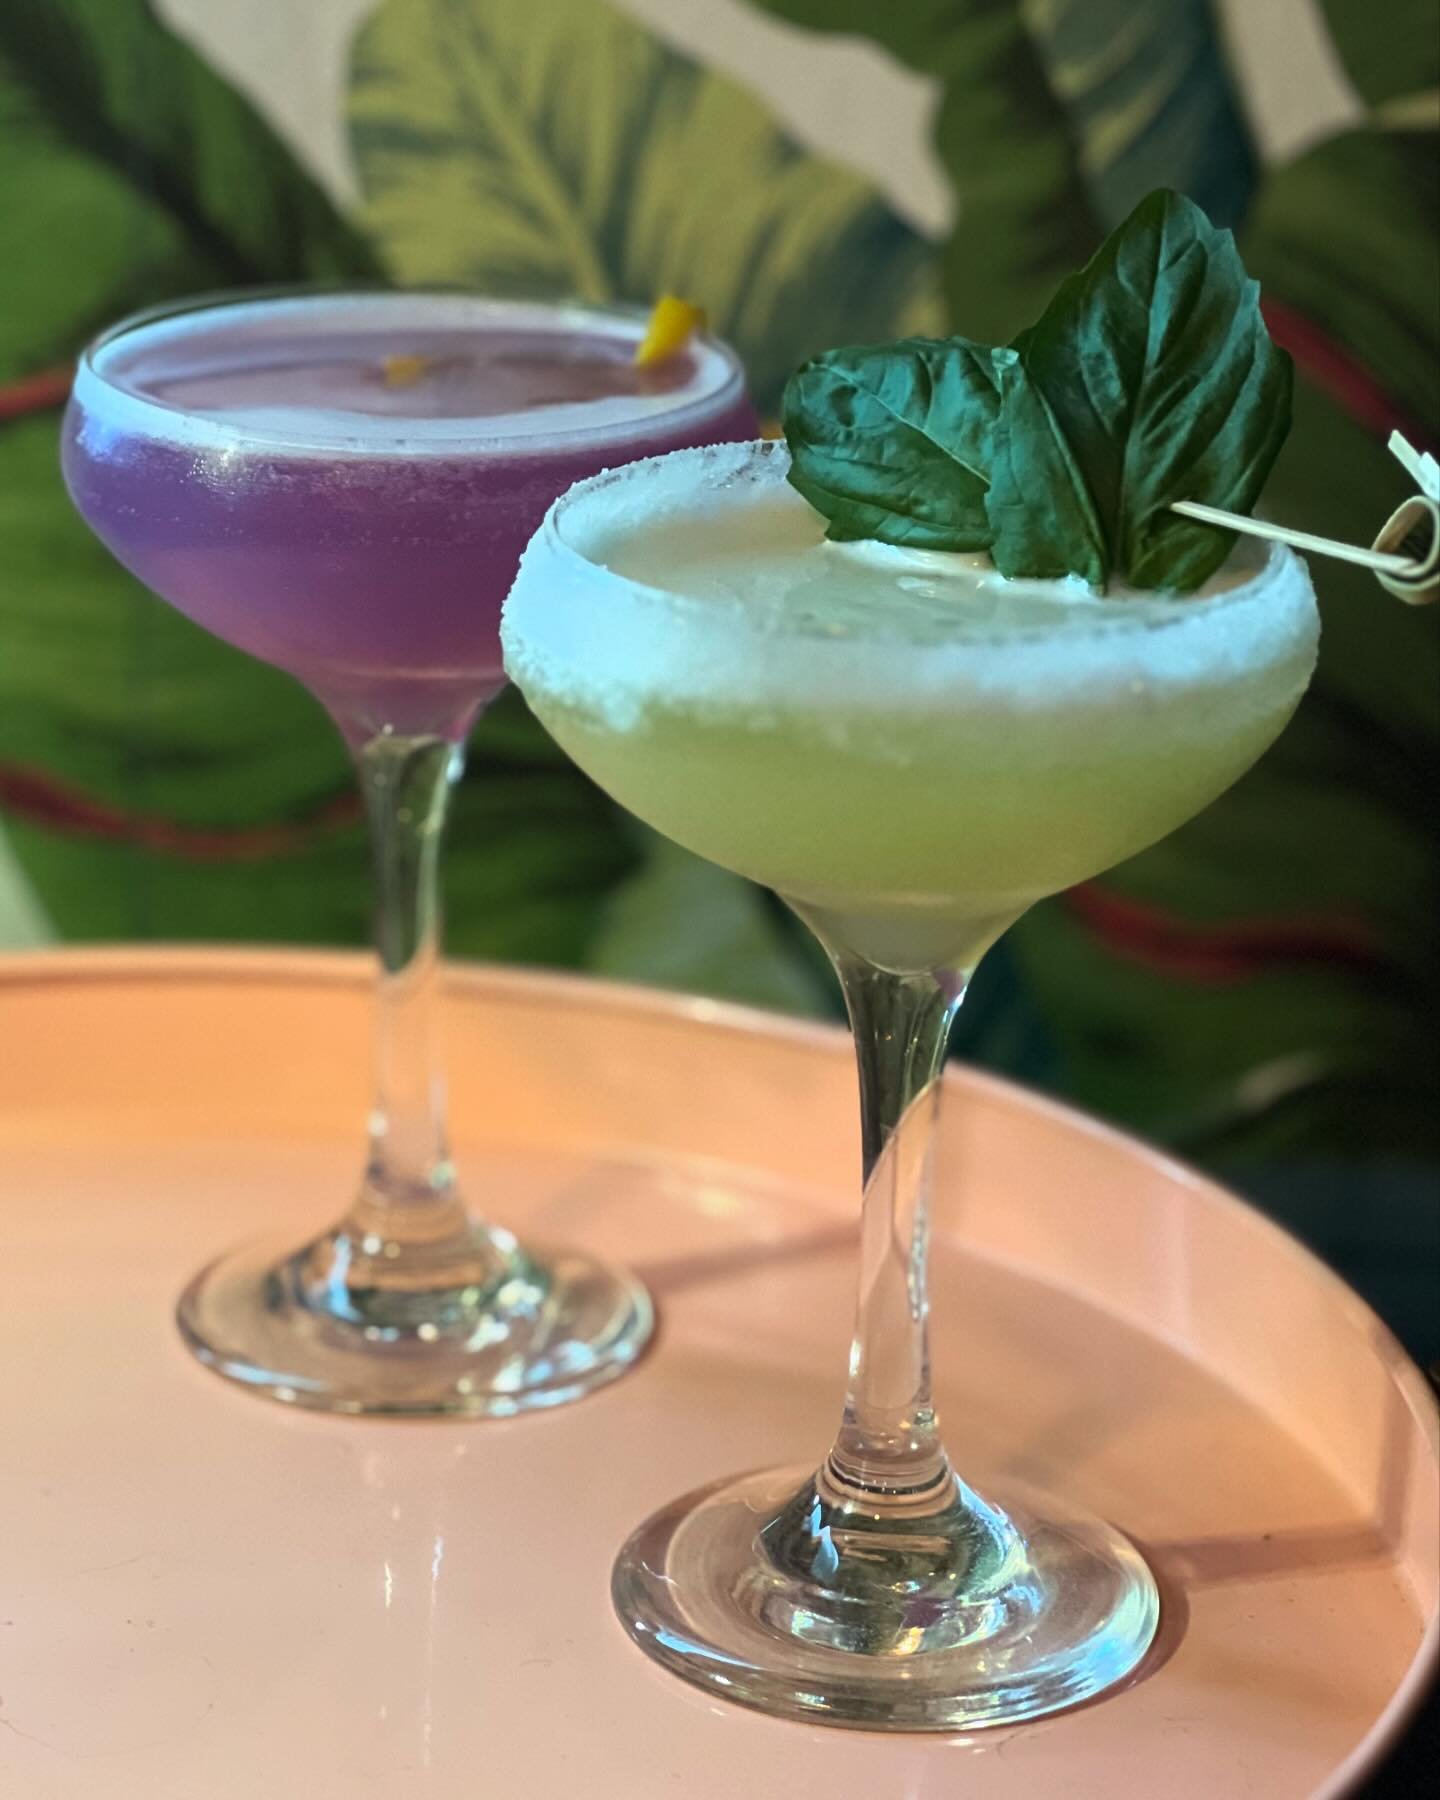 Mother&rsquo;s Day specials (available all weekend)
&bull; Lavender French 75
&bull; Cucumber mint basil lemon drop